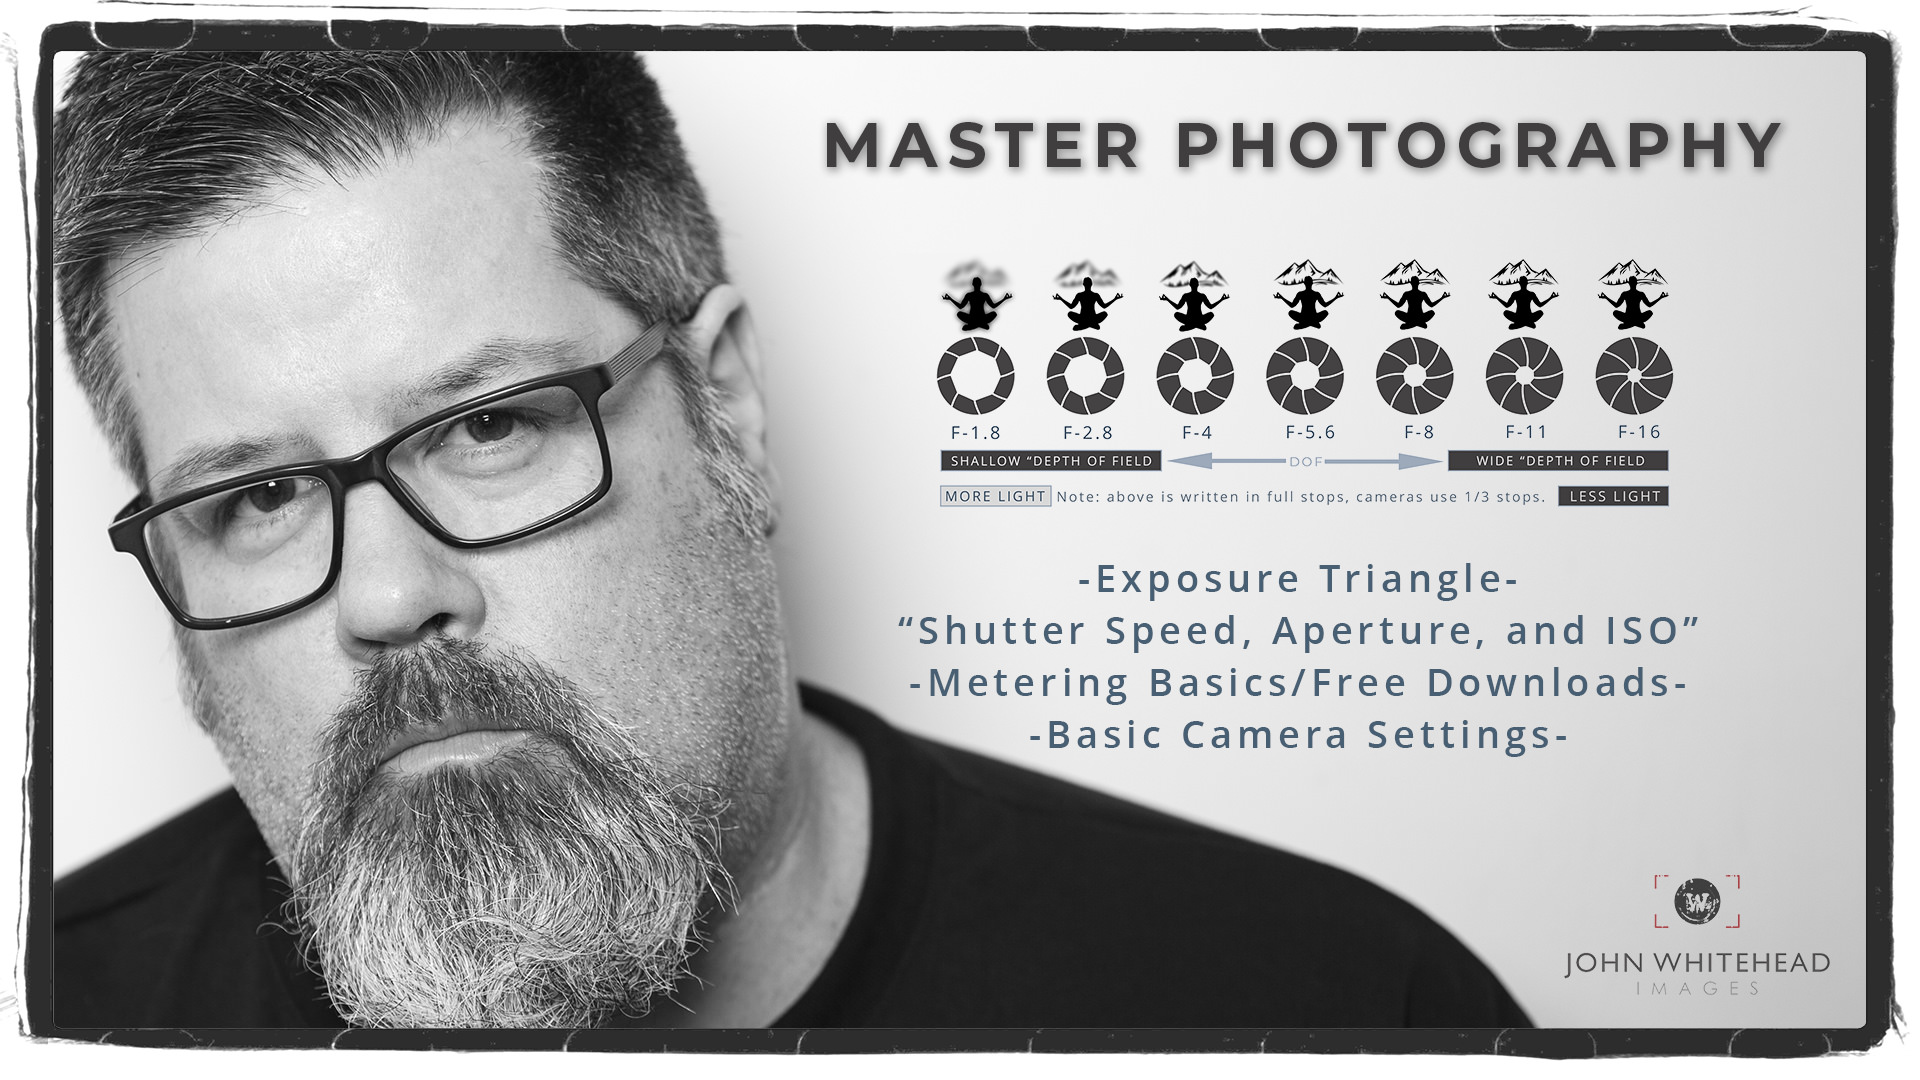 Understanding the 3 Elements of the Exposure Triangle, Mastering Manual Photography<span class="rmp-archive-results-widget rmp-archive-results-widget--not-rated"><i class=" rmp-icon rmp-icon--ratings rmp-icon--star "></i><i class=" rmp-icon rmp-icon--ratings rmp-icon--star "></i><i class=" rmp-icon rmp-icon--ratings rmp-icon--star "></i><i class=" rmp-icon rmp-icon--ratings rmp-icon--star "></i><i class=" rmp-icon rmp-icon--ratings rmp-icon--star "></i> <span>0 (0)</span></span>